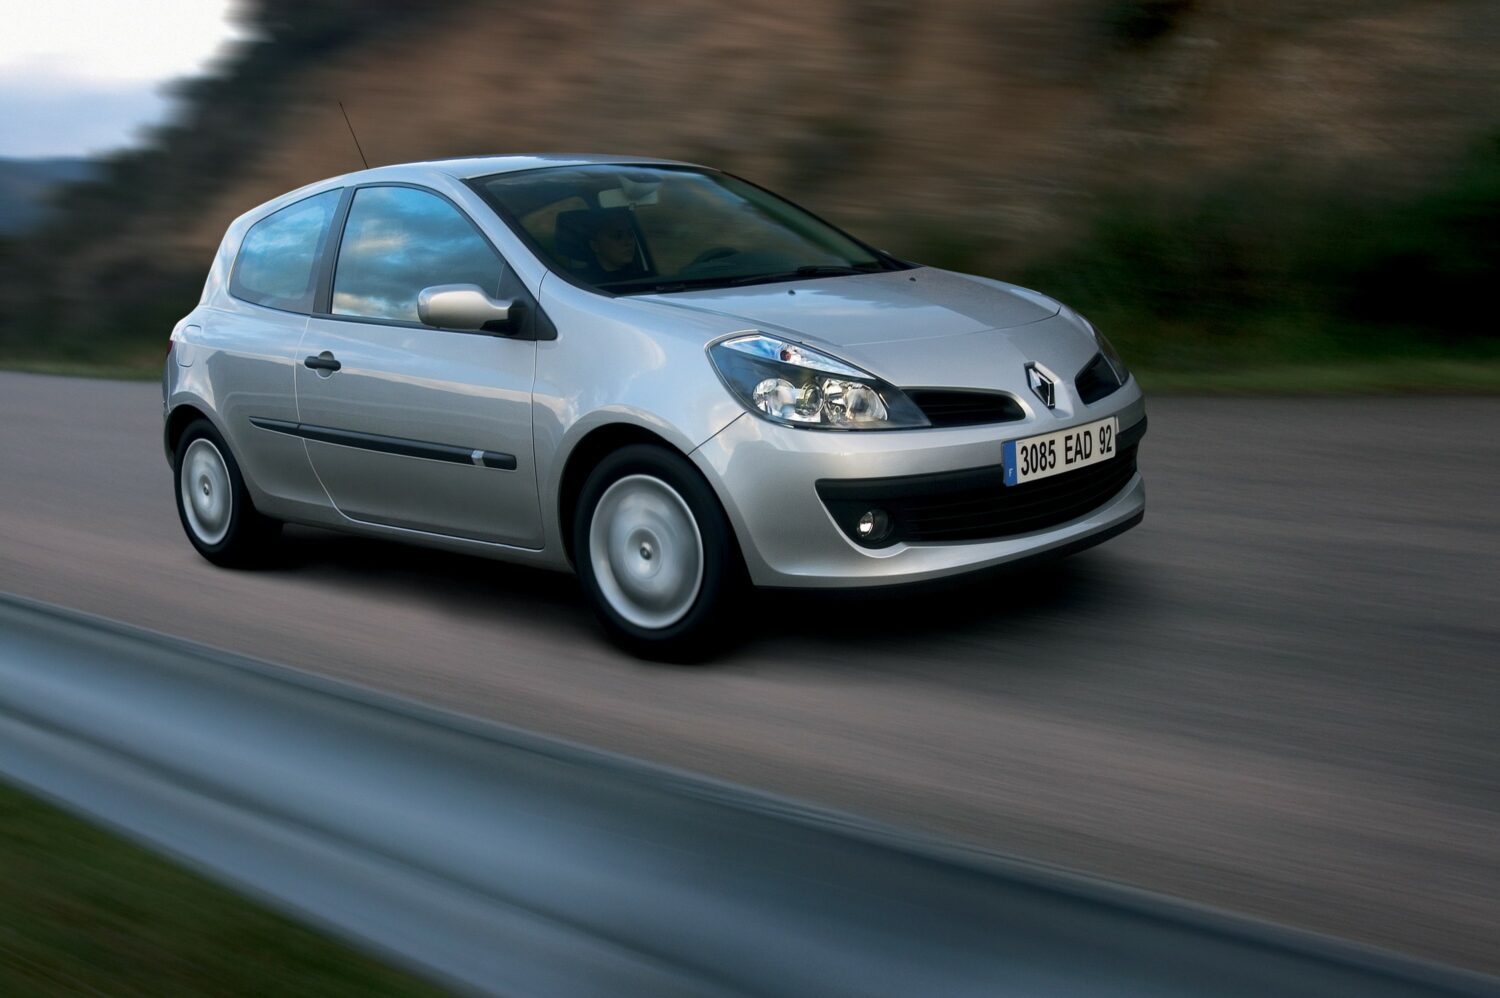 2020 - 30 years of Renault CLIO - Renault CLIO III (2005-2012)